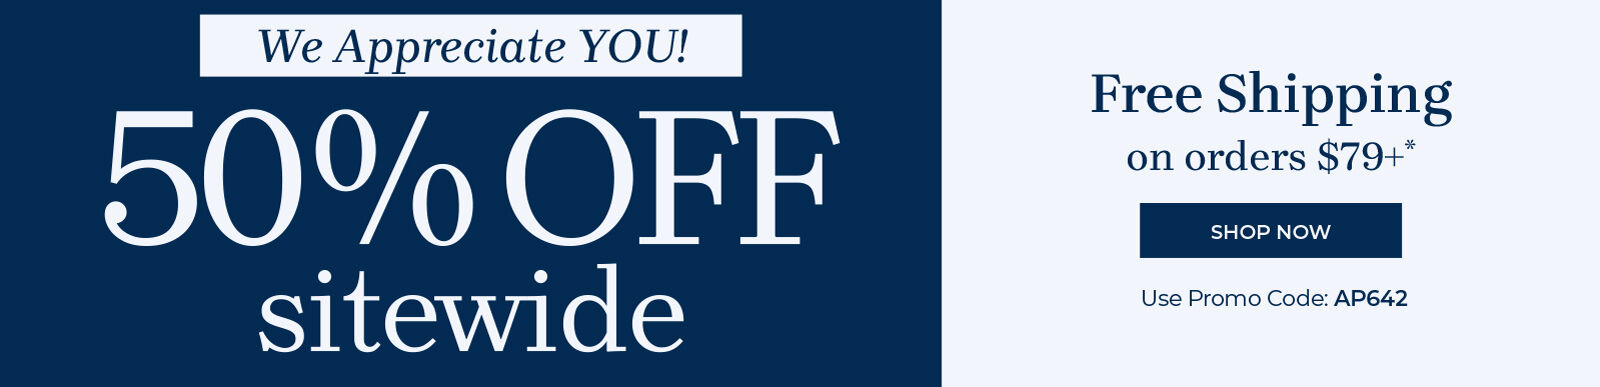 we appreciate you! 50% off sitewide free shipping on orders $79+ shop now use promo code: AP642